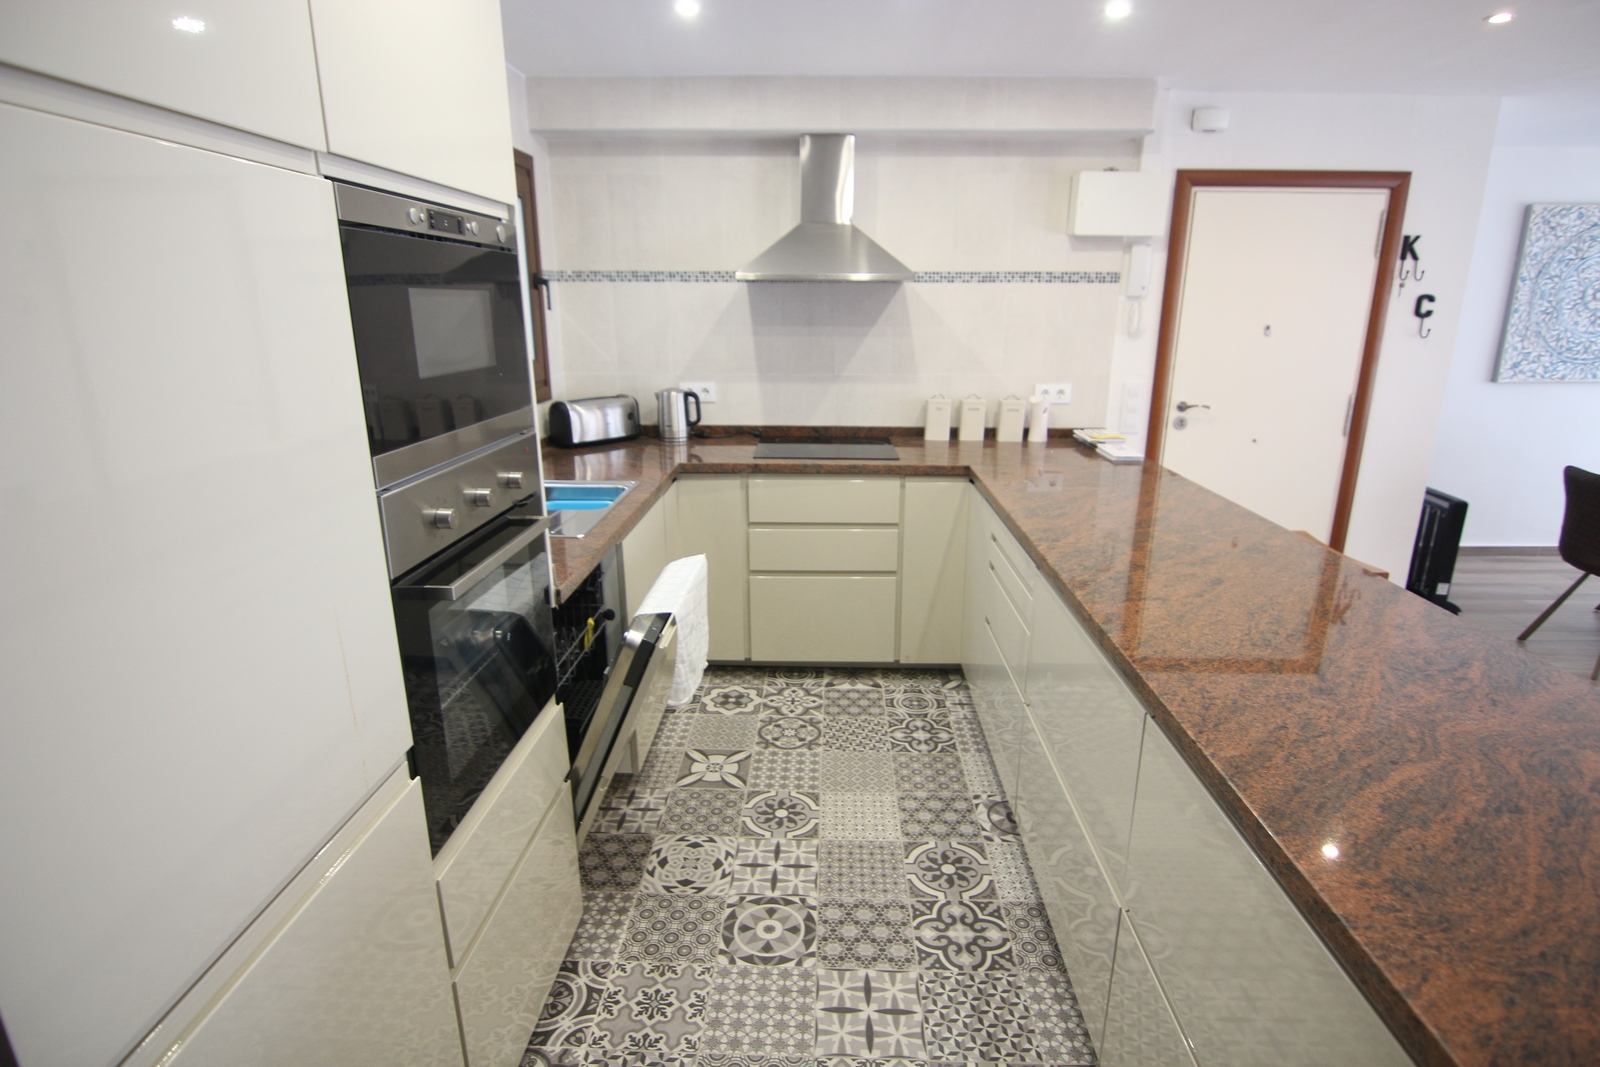 Apartment for sale completely renovated in the center of Jávea.